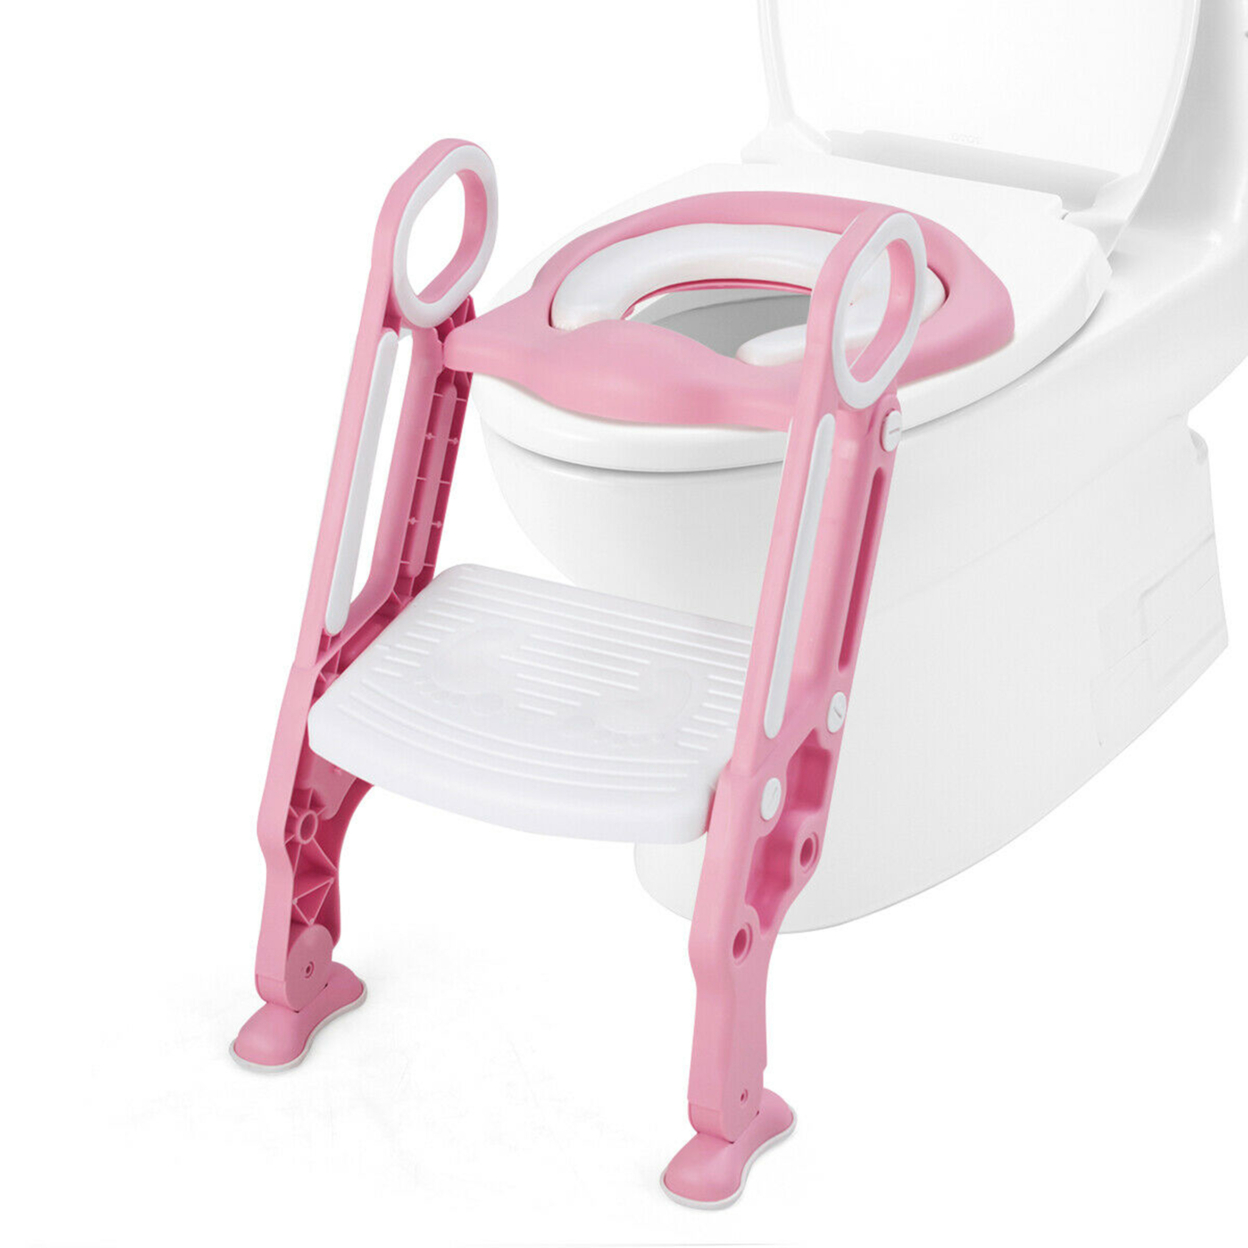 Foldable Potty Training Toilet Seat W/ Step Ladder Adjustable Baby Kids Home